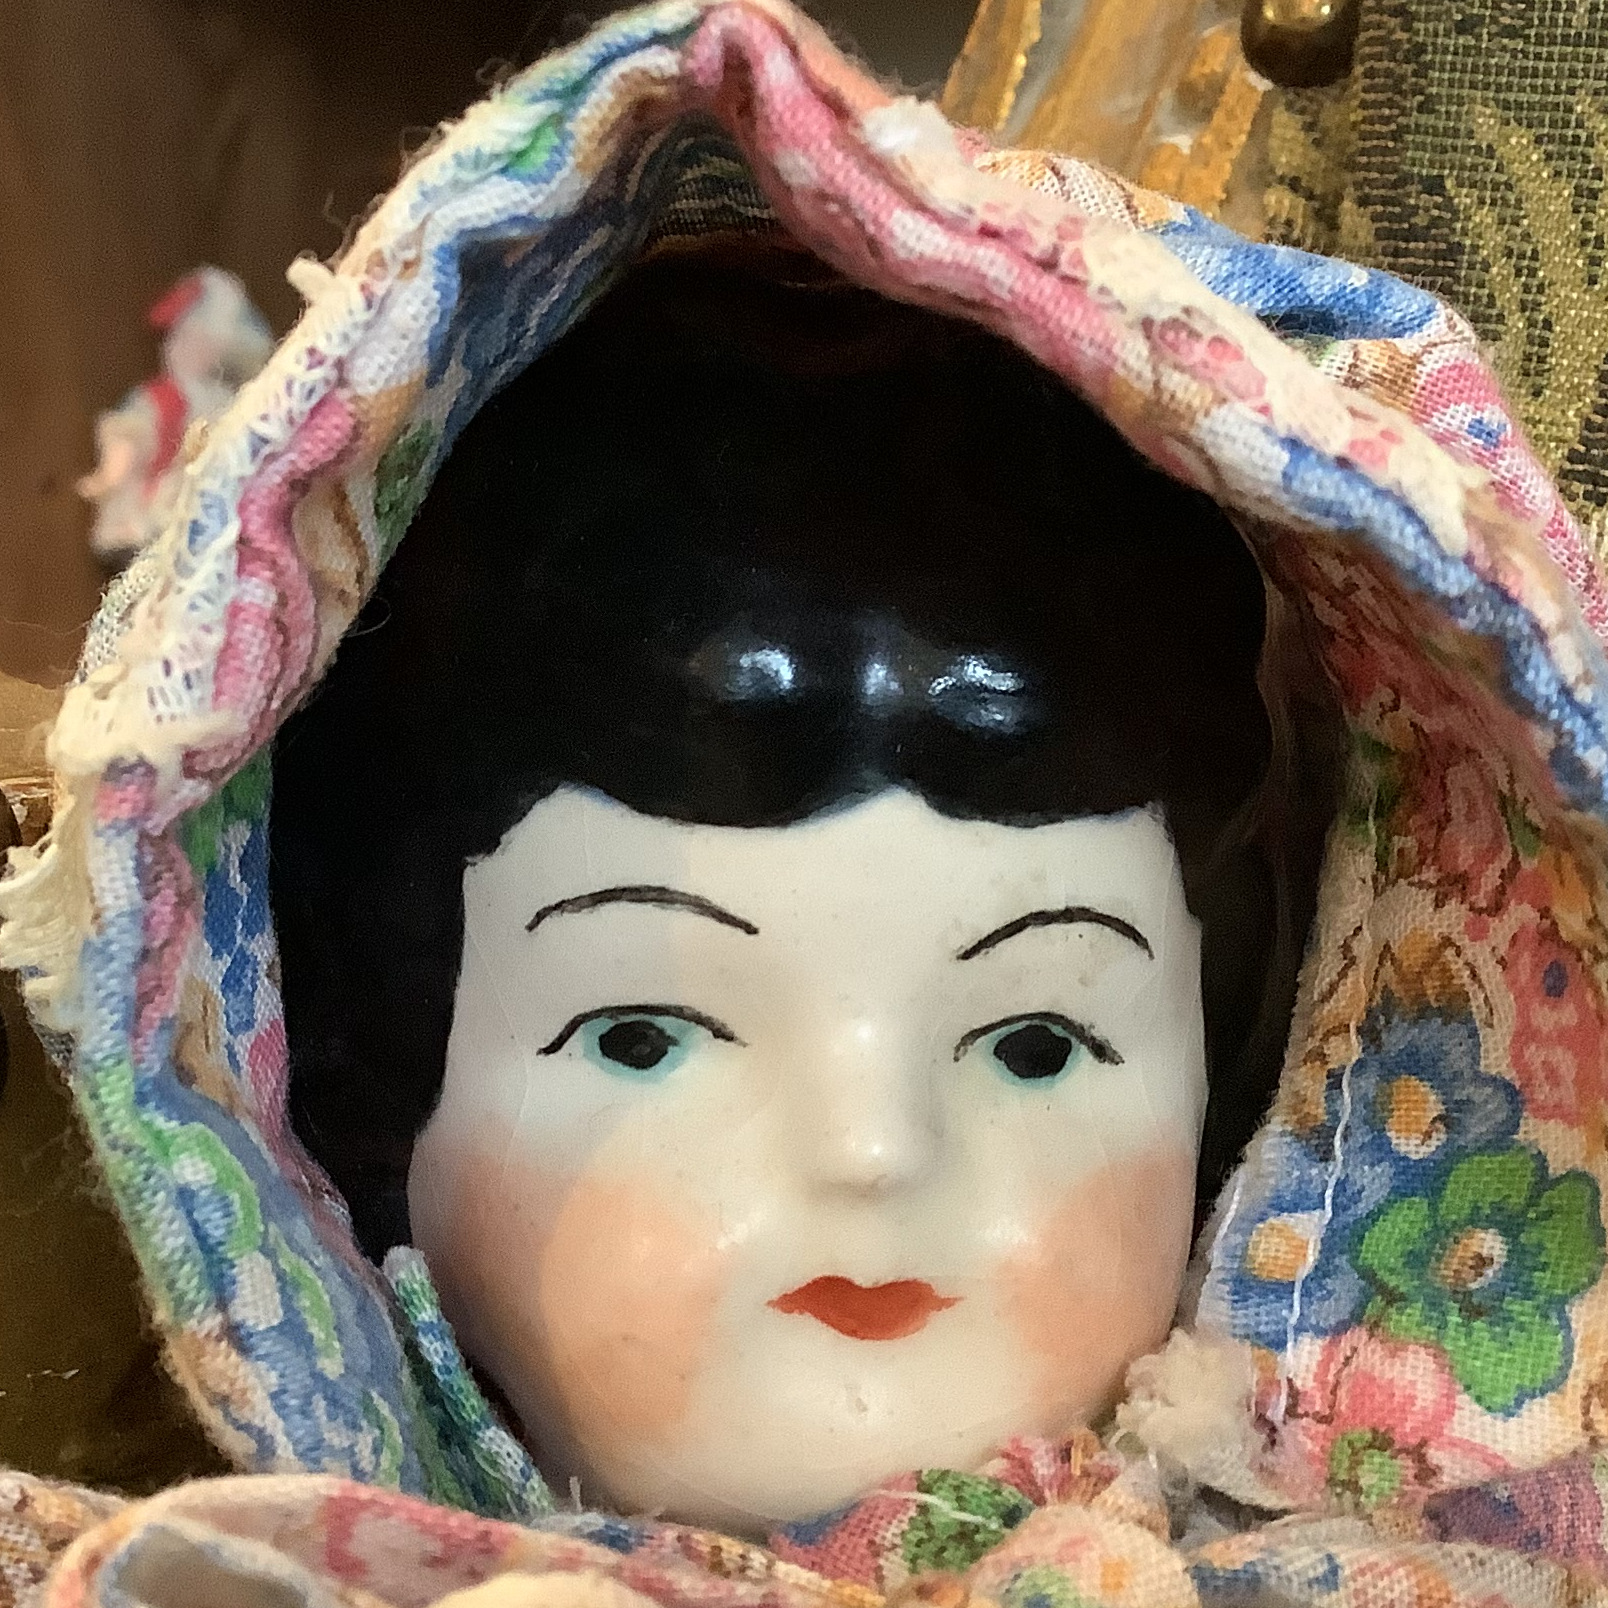 Face of china doll with painted black hair and light blue eyes